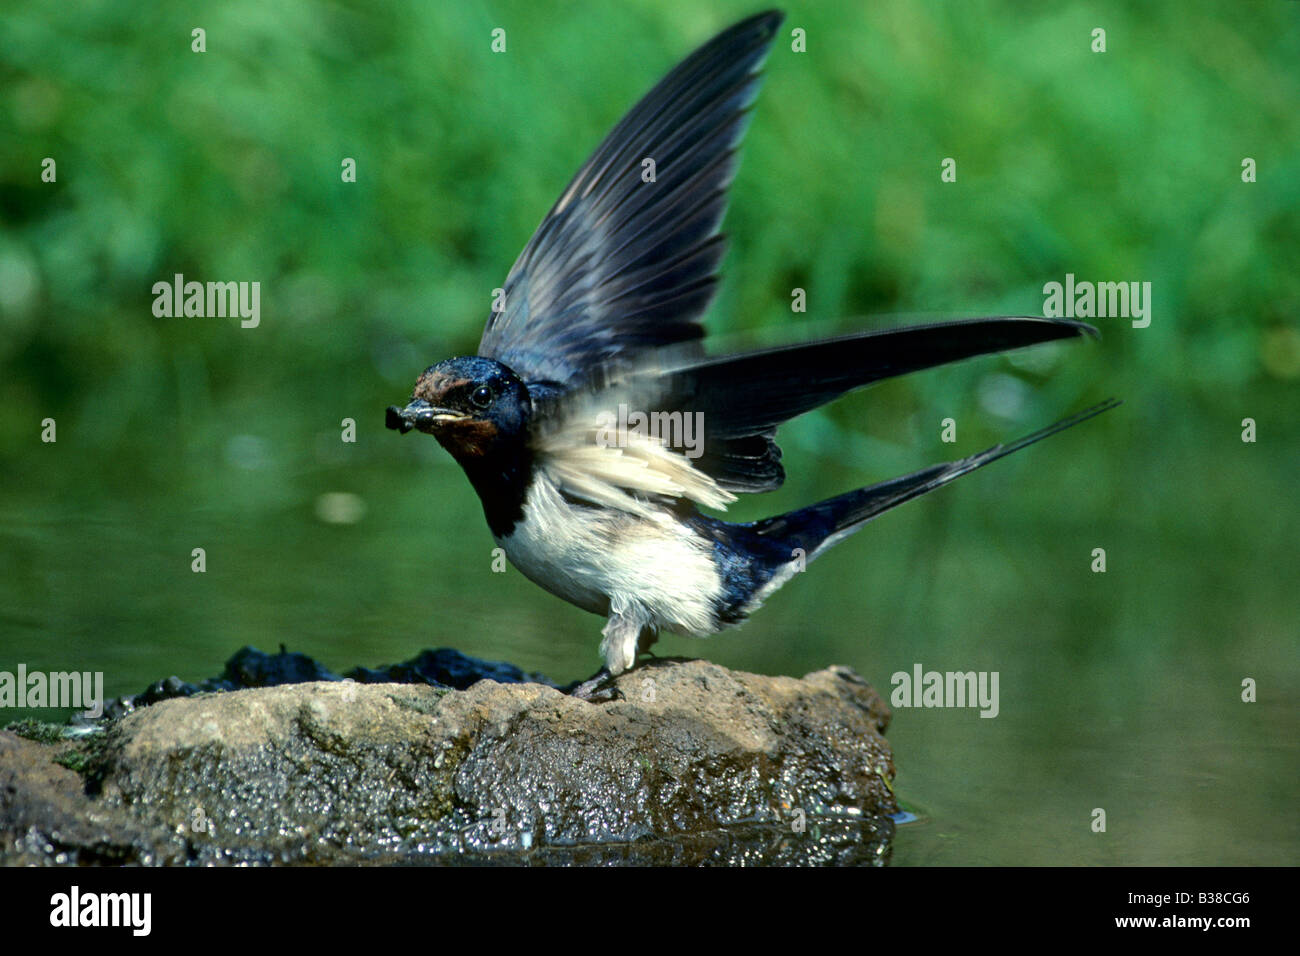 Swallow Barn swallow (Hirundo rustica) collecting mud for nest building Stock Photo